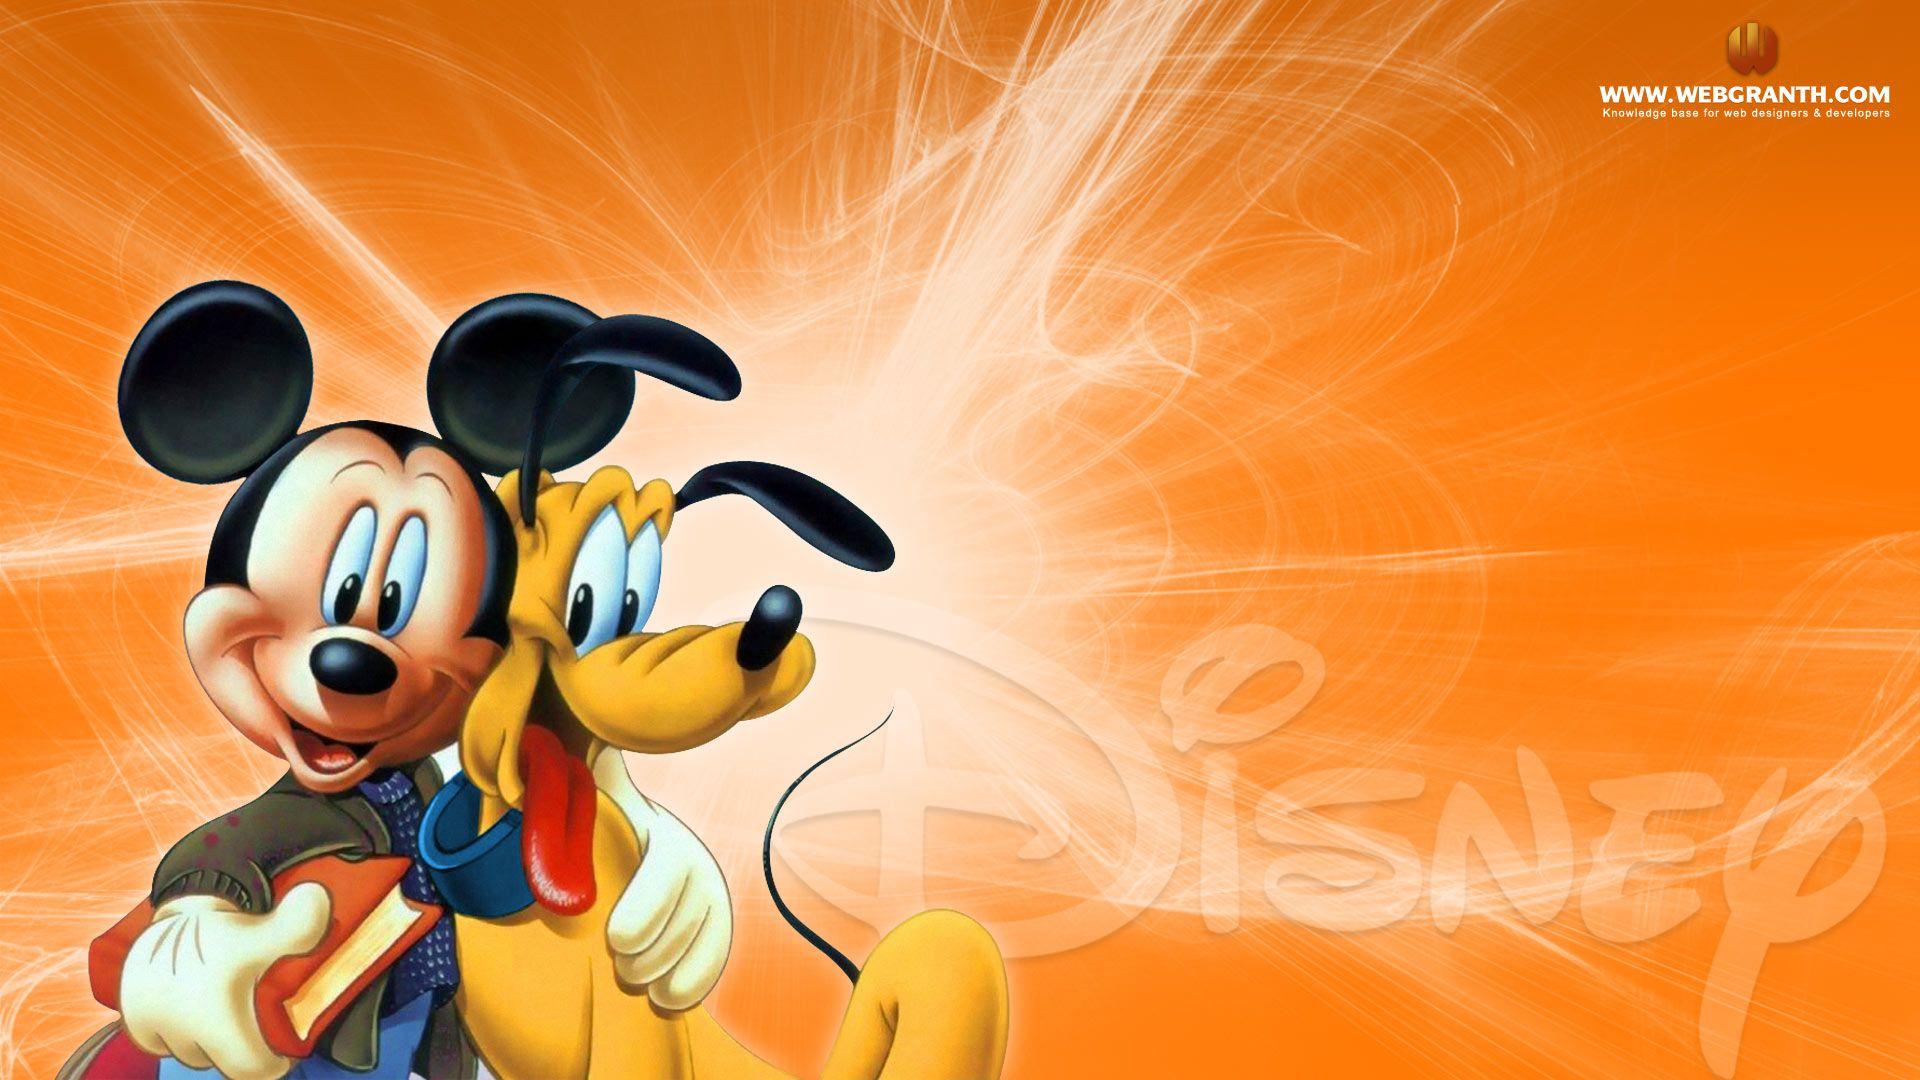 1920x1080 Disney Mickey Mouse And Pluto Wallpaper HD Widescreen Free